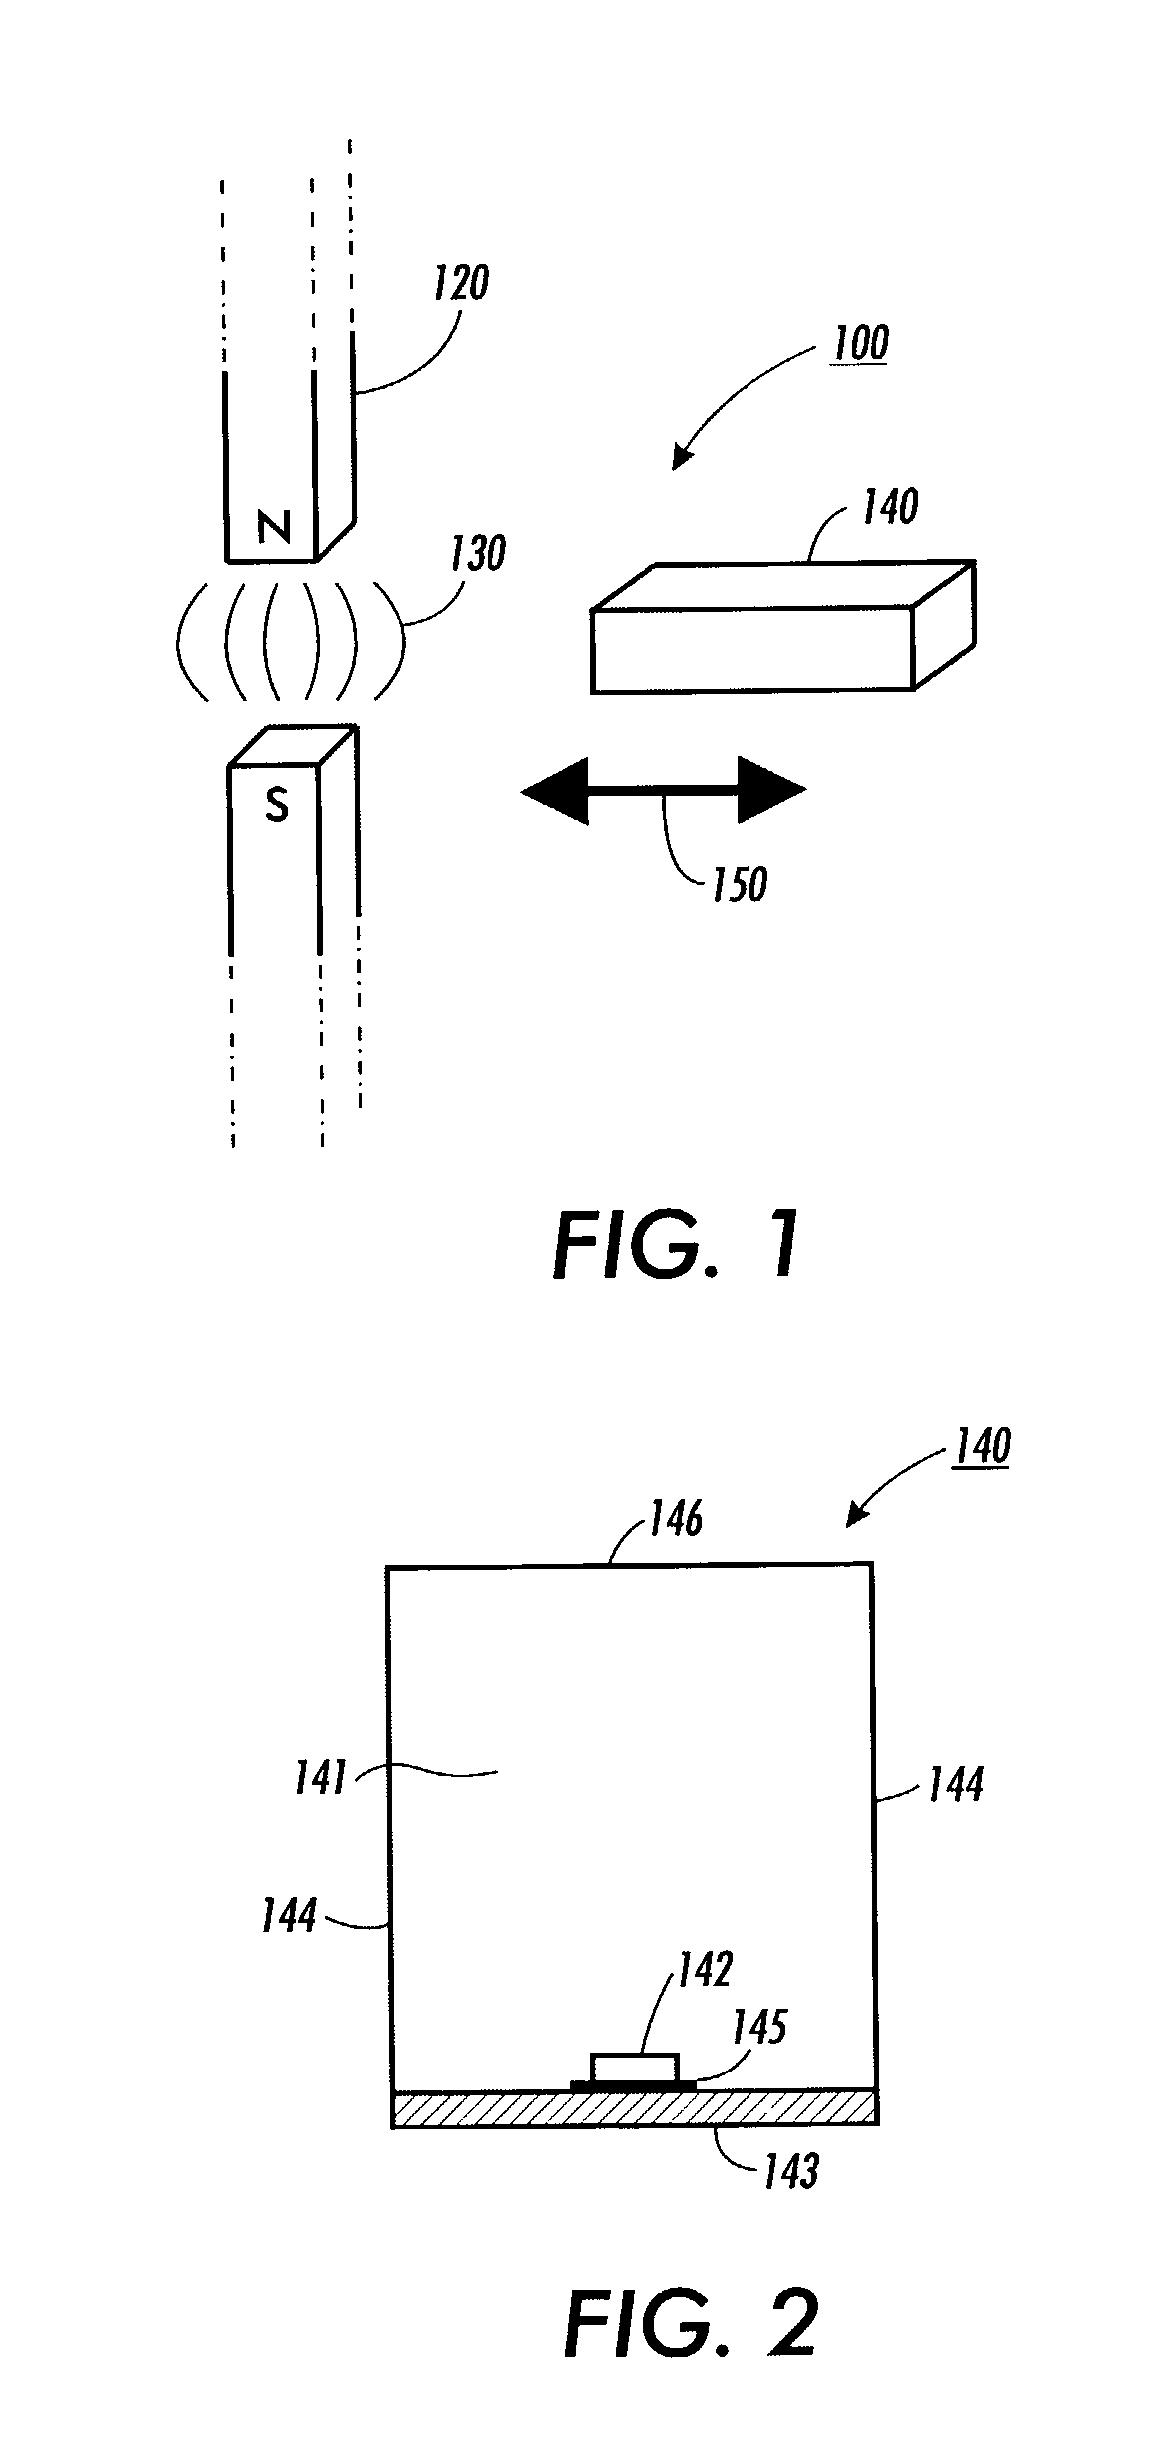 Systems and methods for producing superradiance using molecular magnets